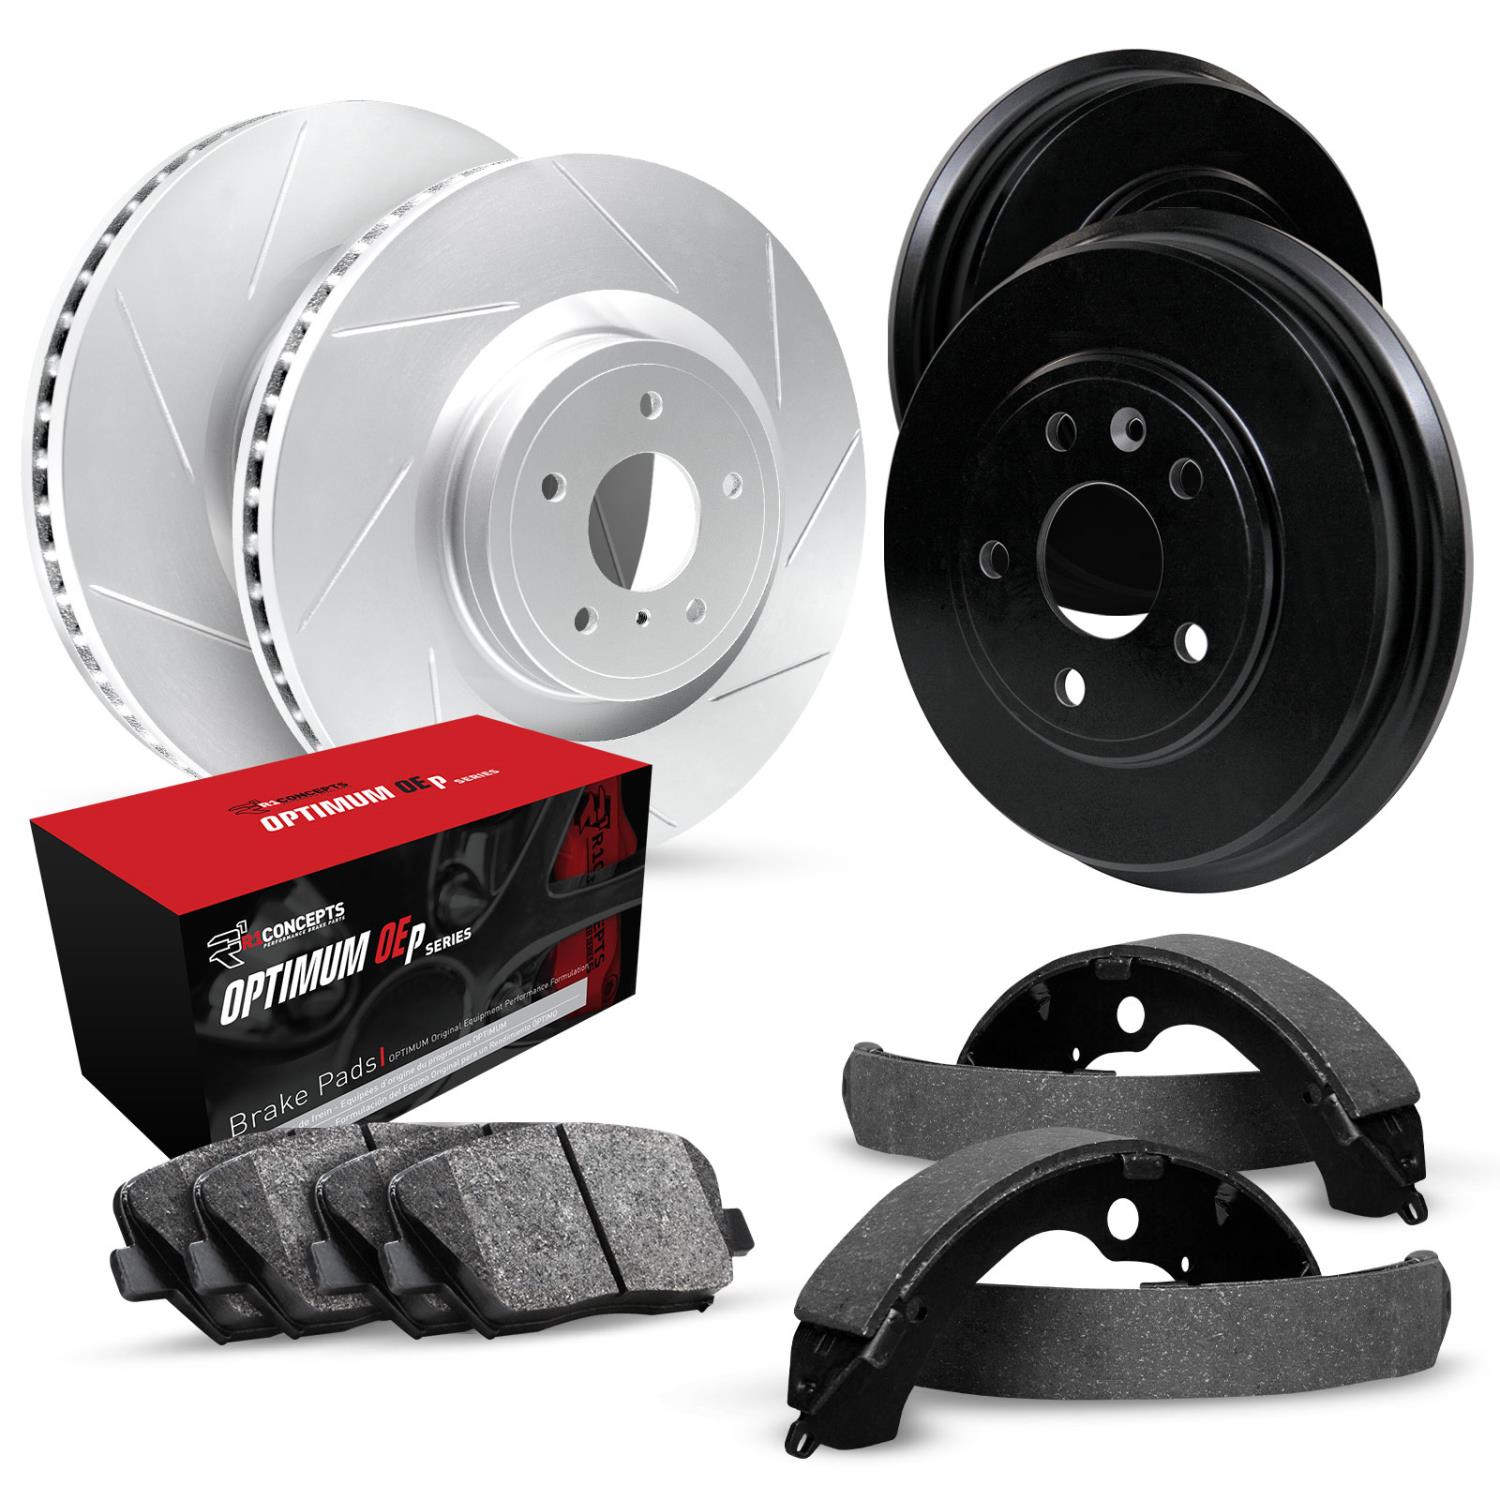 GEO-Carbon Slotted Brake Rotor & Drum Set w/Optimum OE Pads & Shoes, 1998-2004 Infiniti/Nissan, Position: Front & Rear